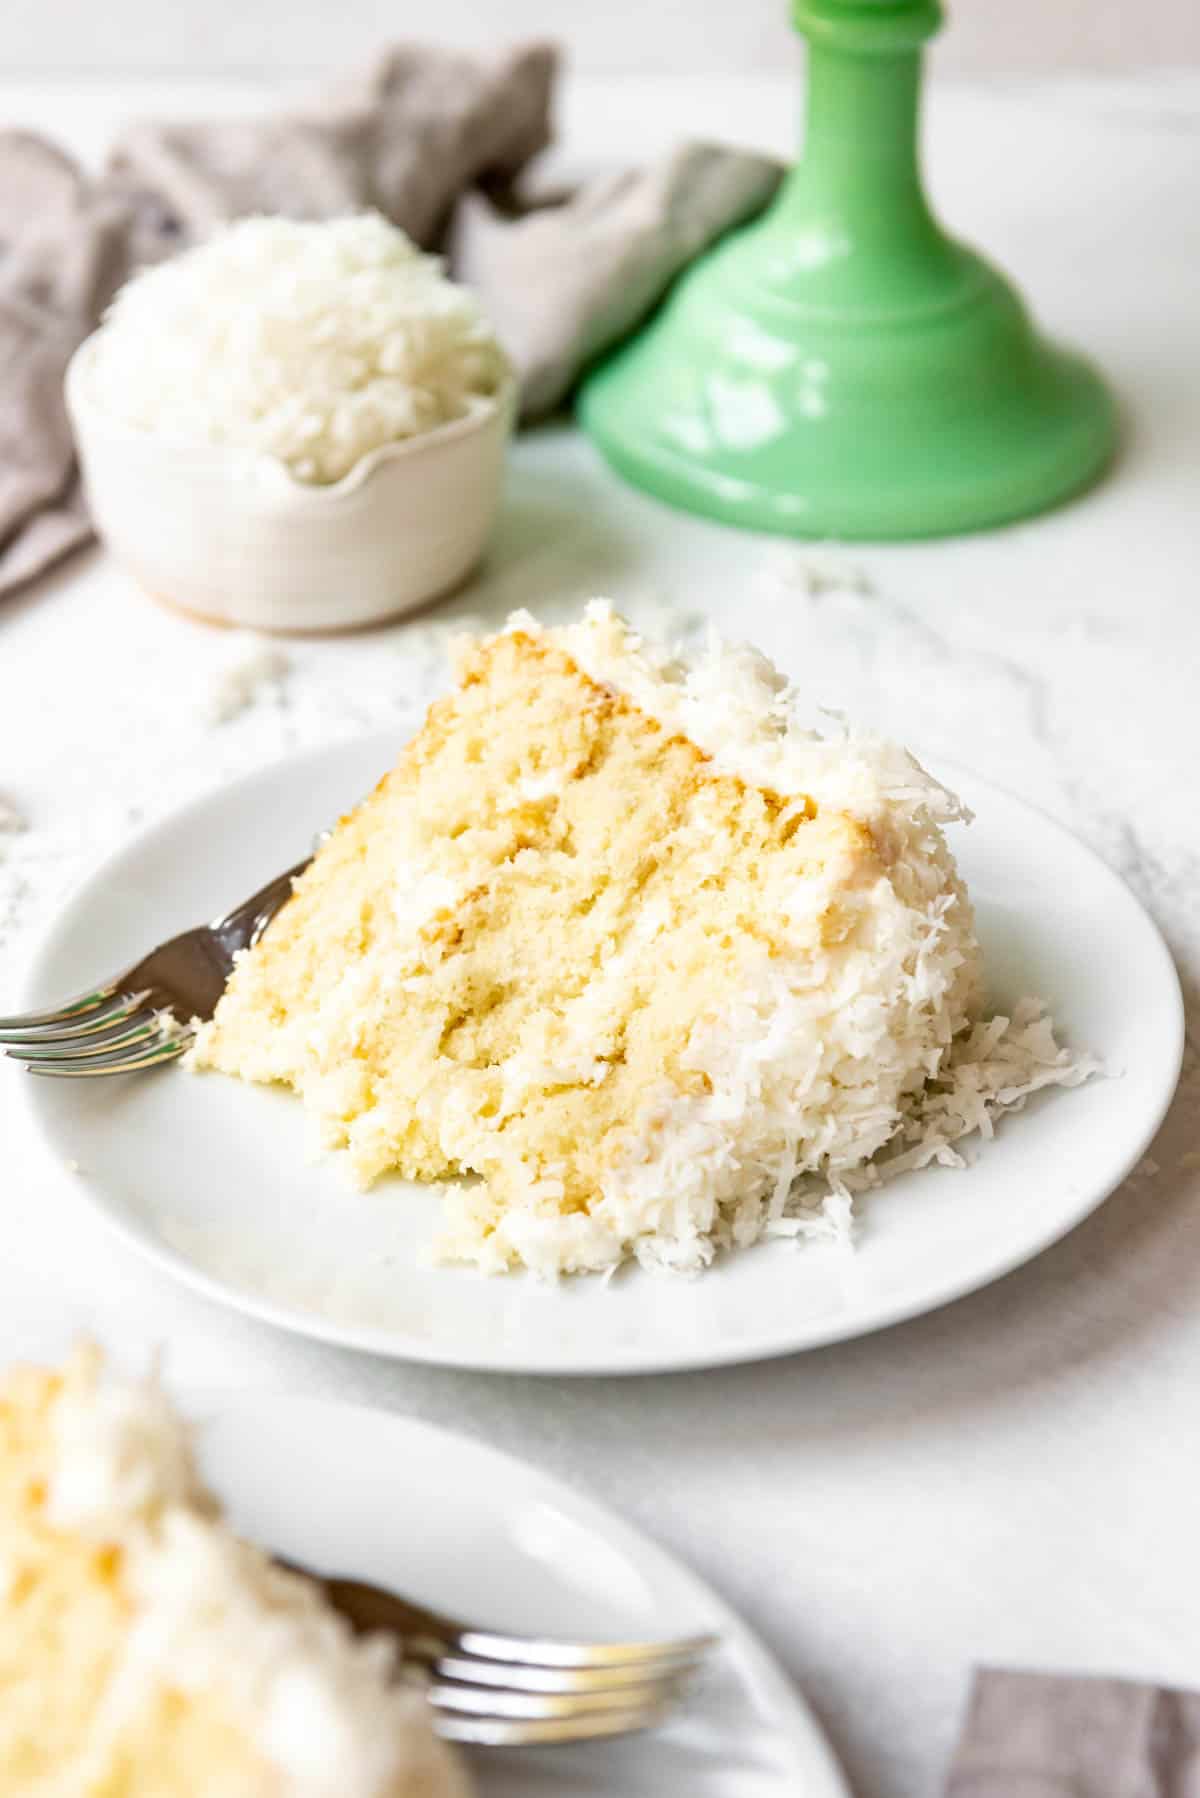 A slice of coconut cake on a white plate with a fork.